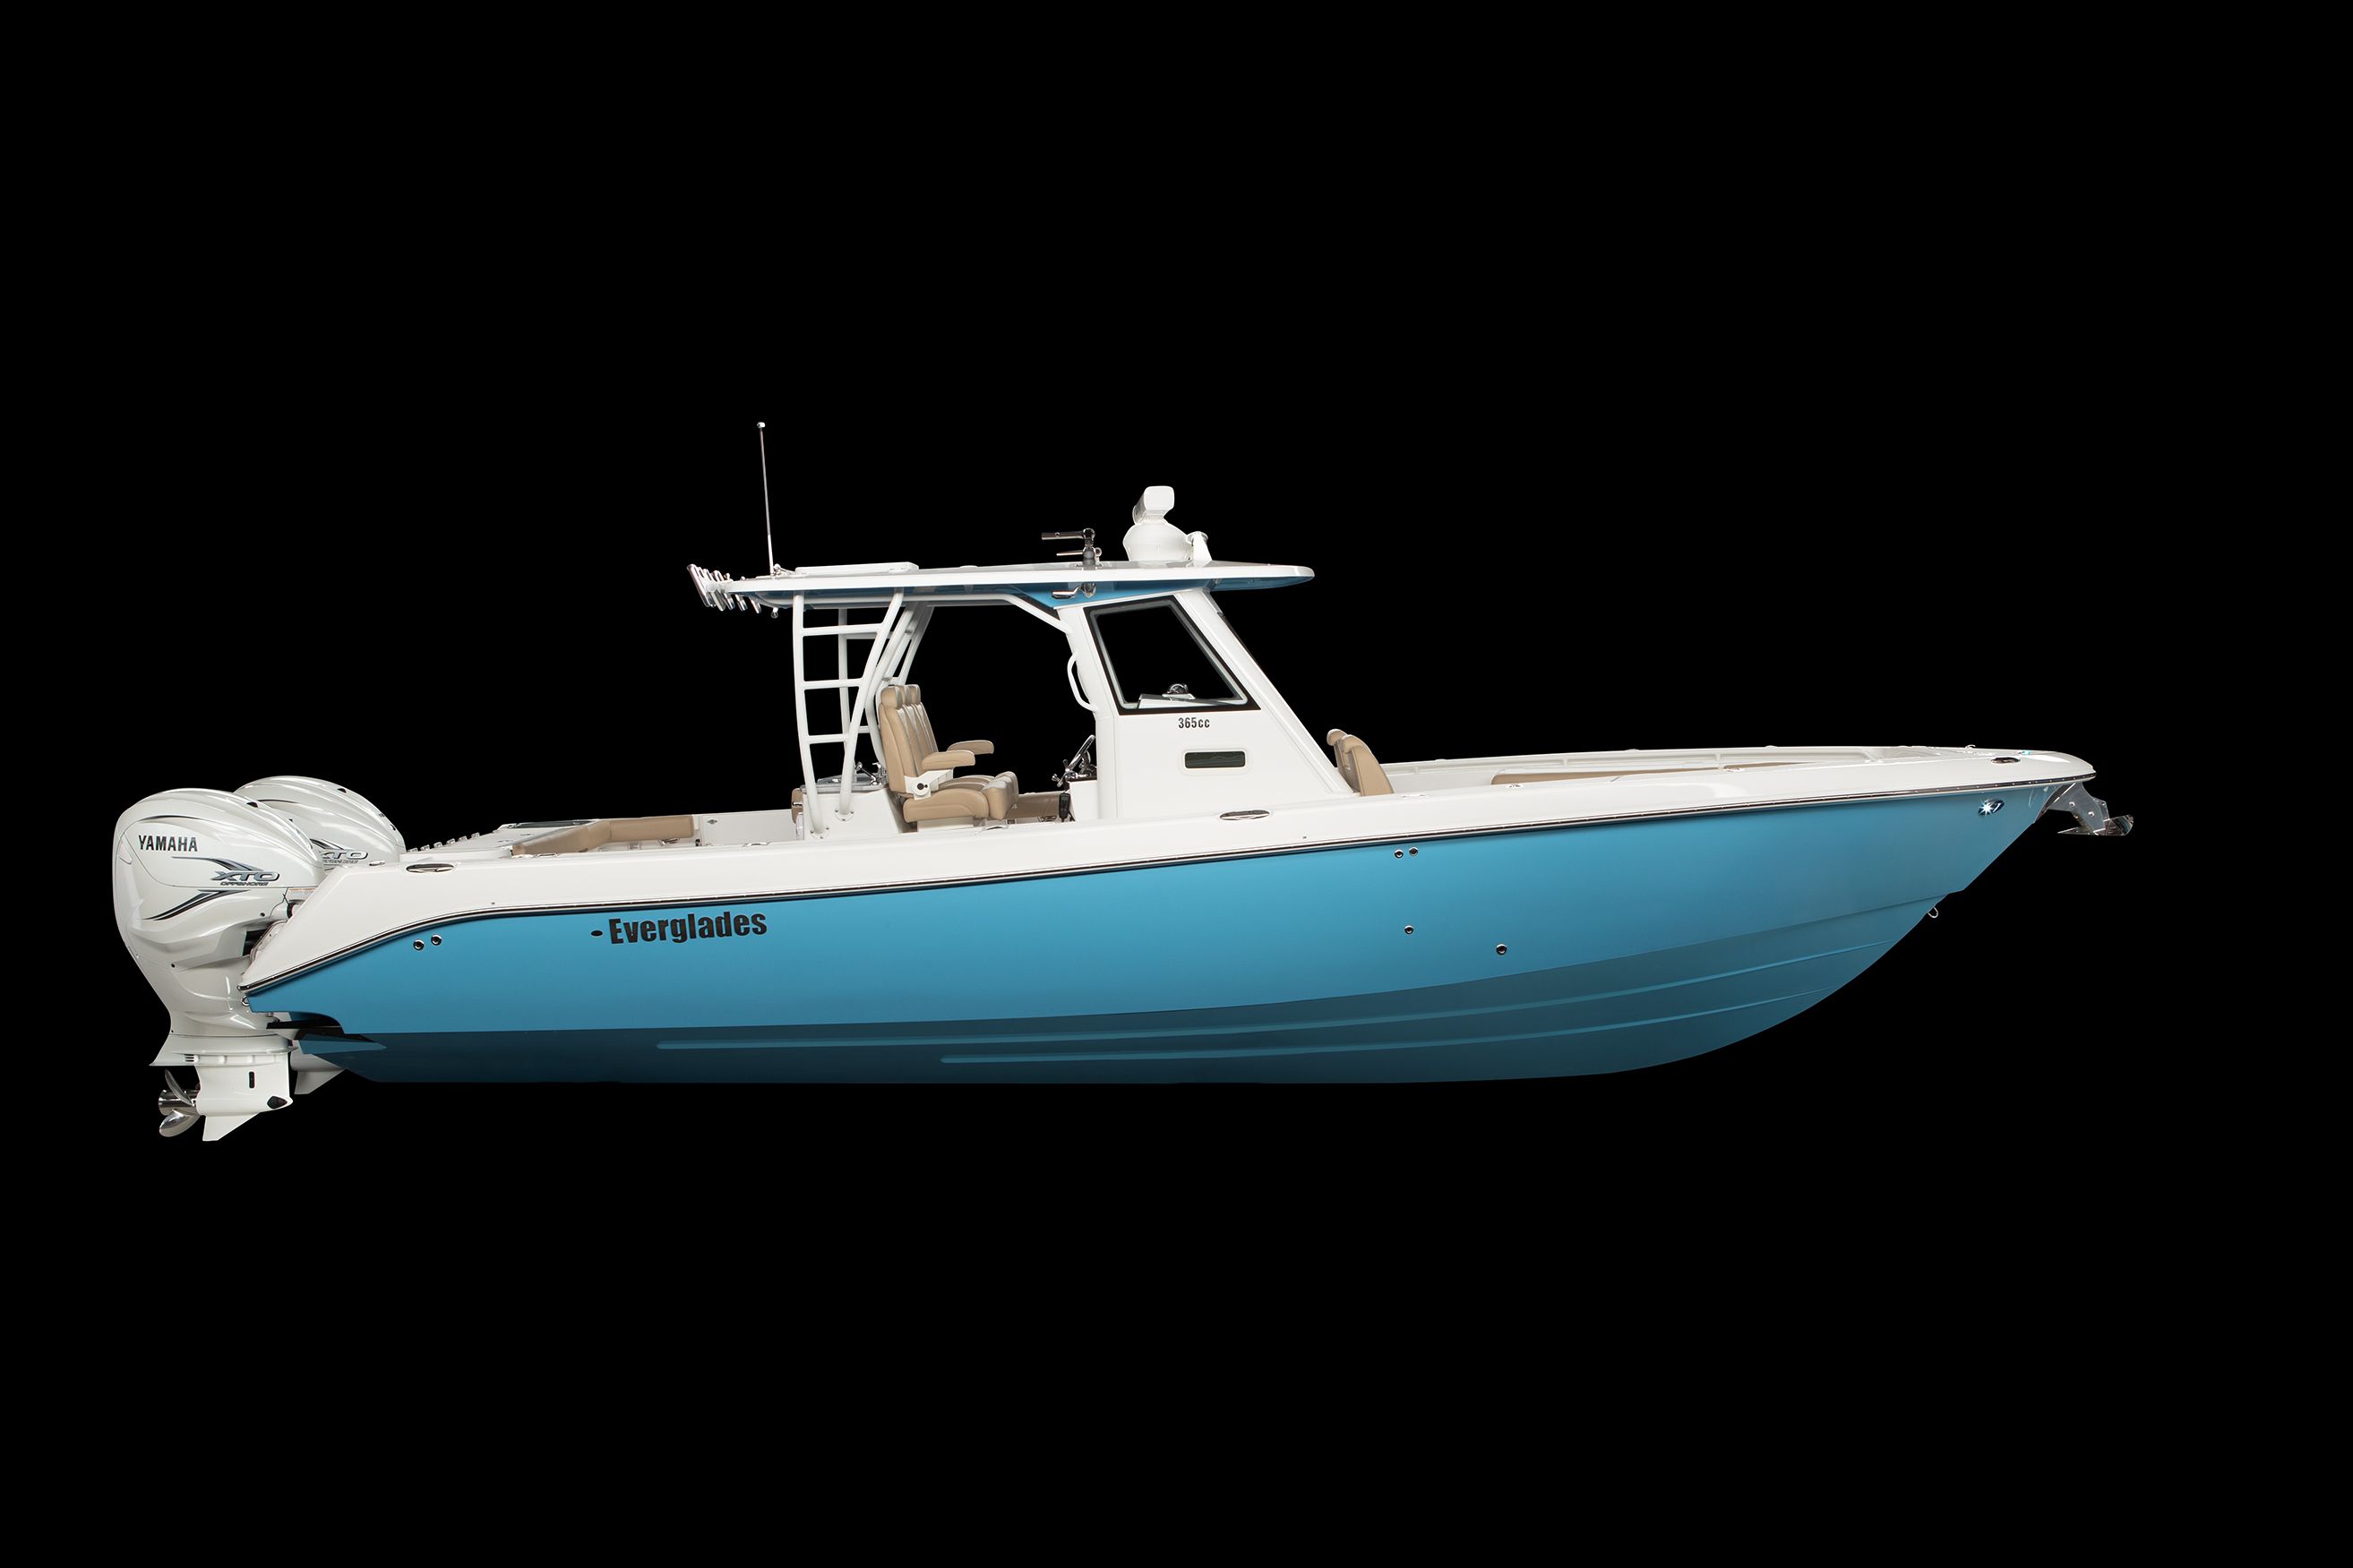 Client: Everglades Boats